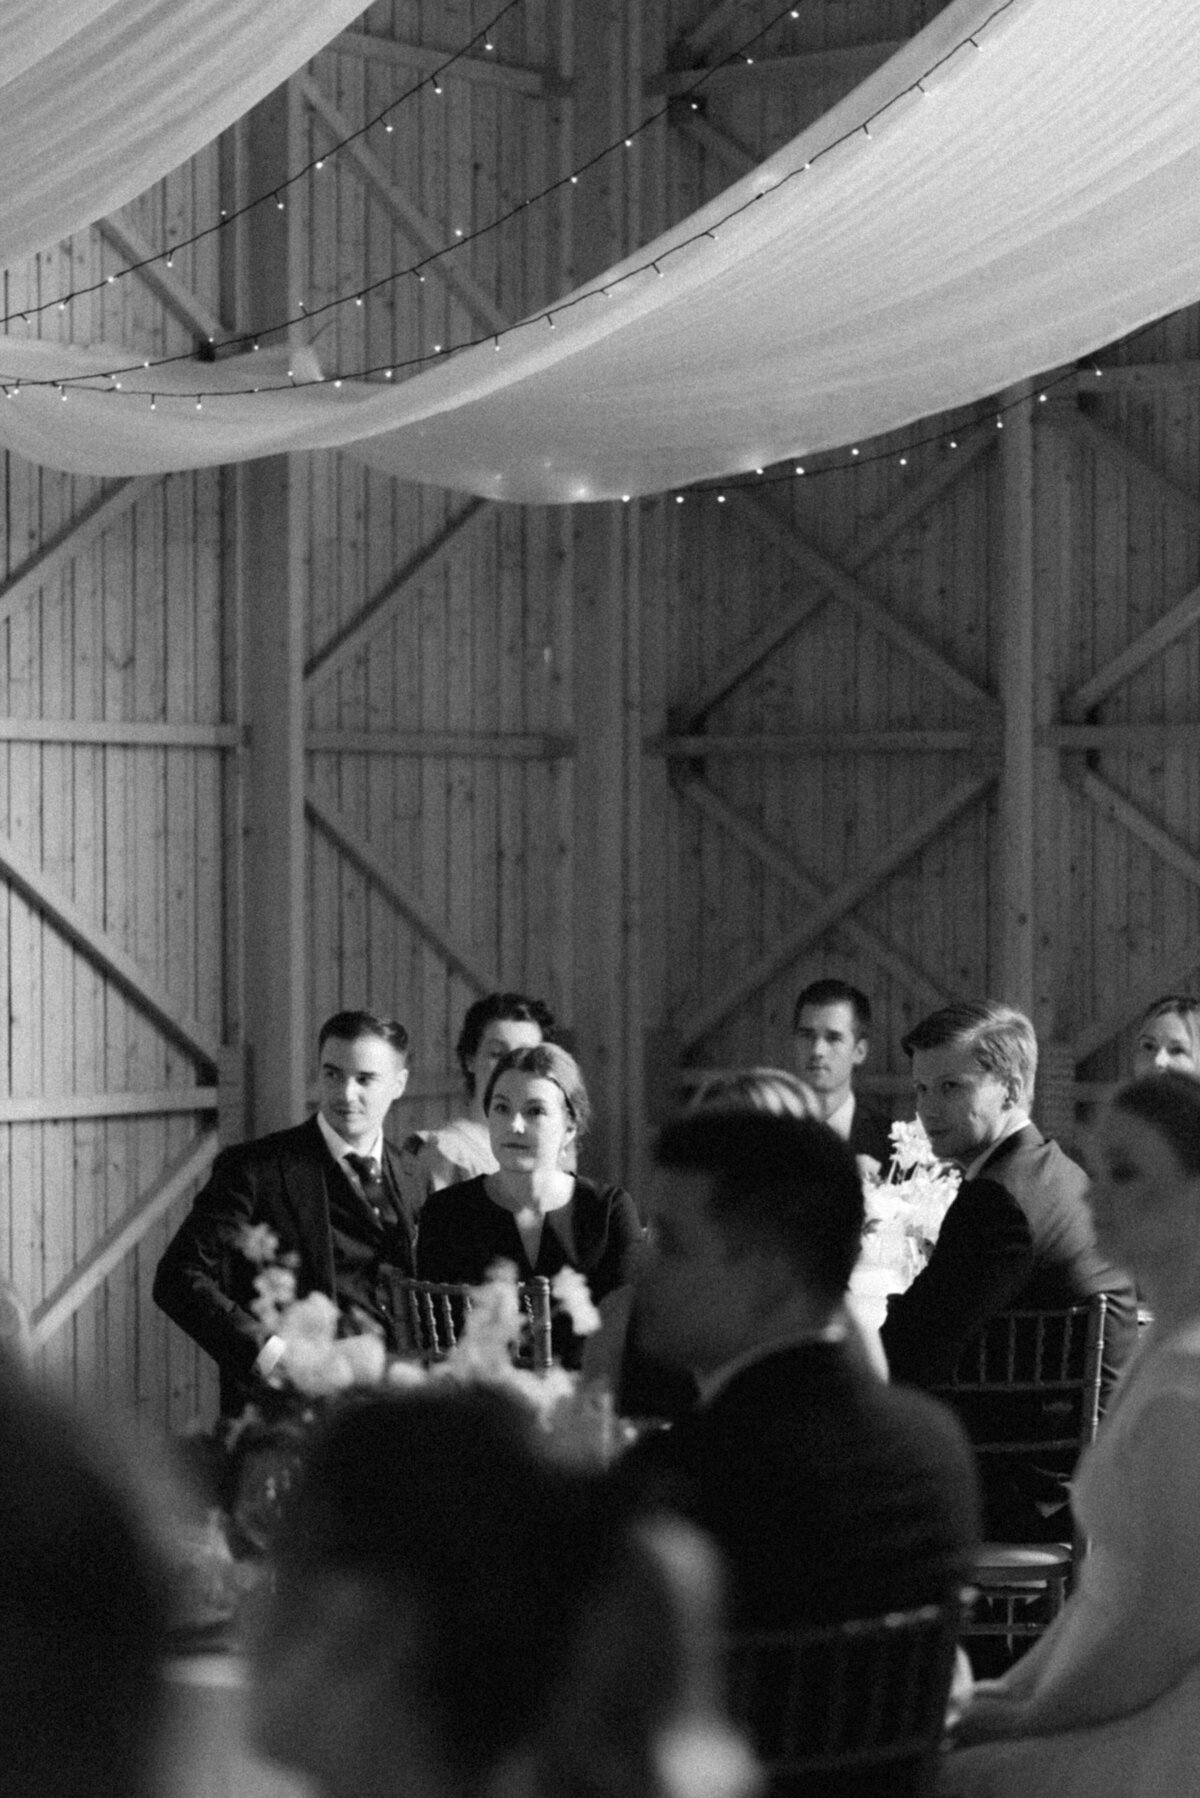 Guests listening to the speech in the wedding. Image captured by wedding photographer Hannika Gabrielsson.